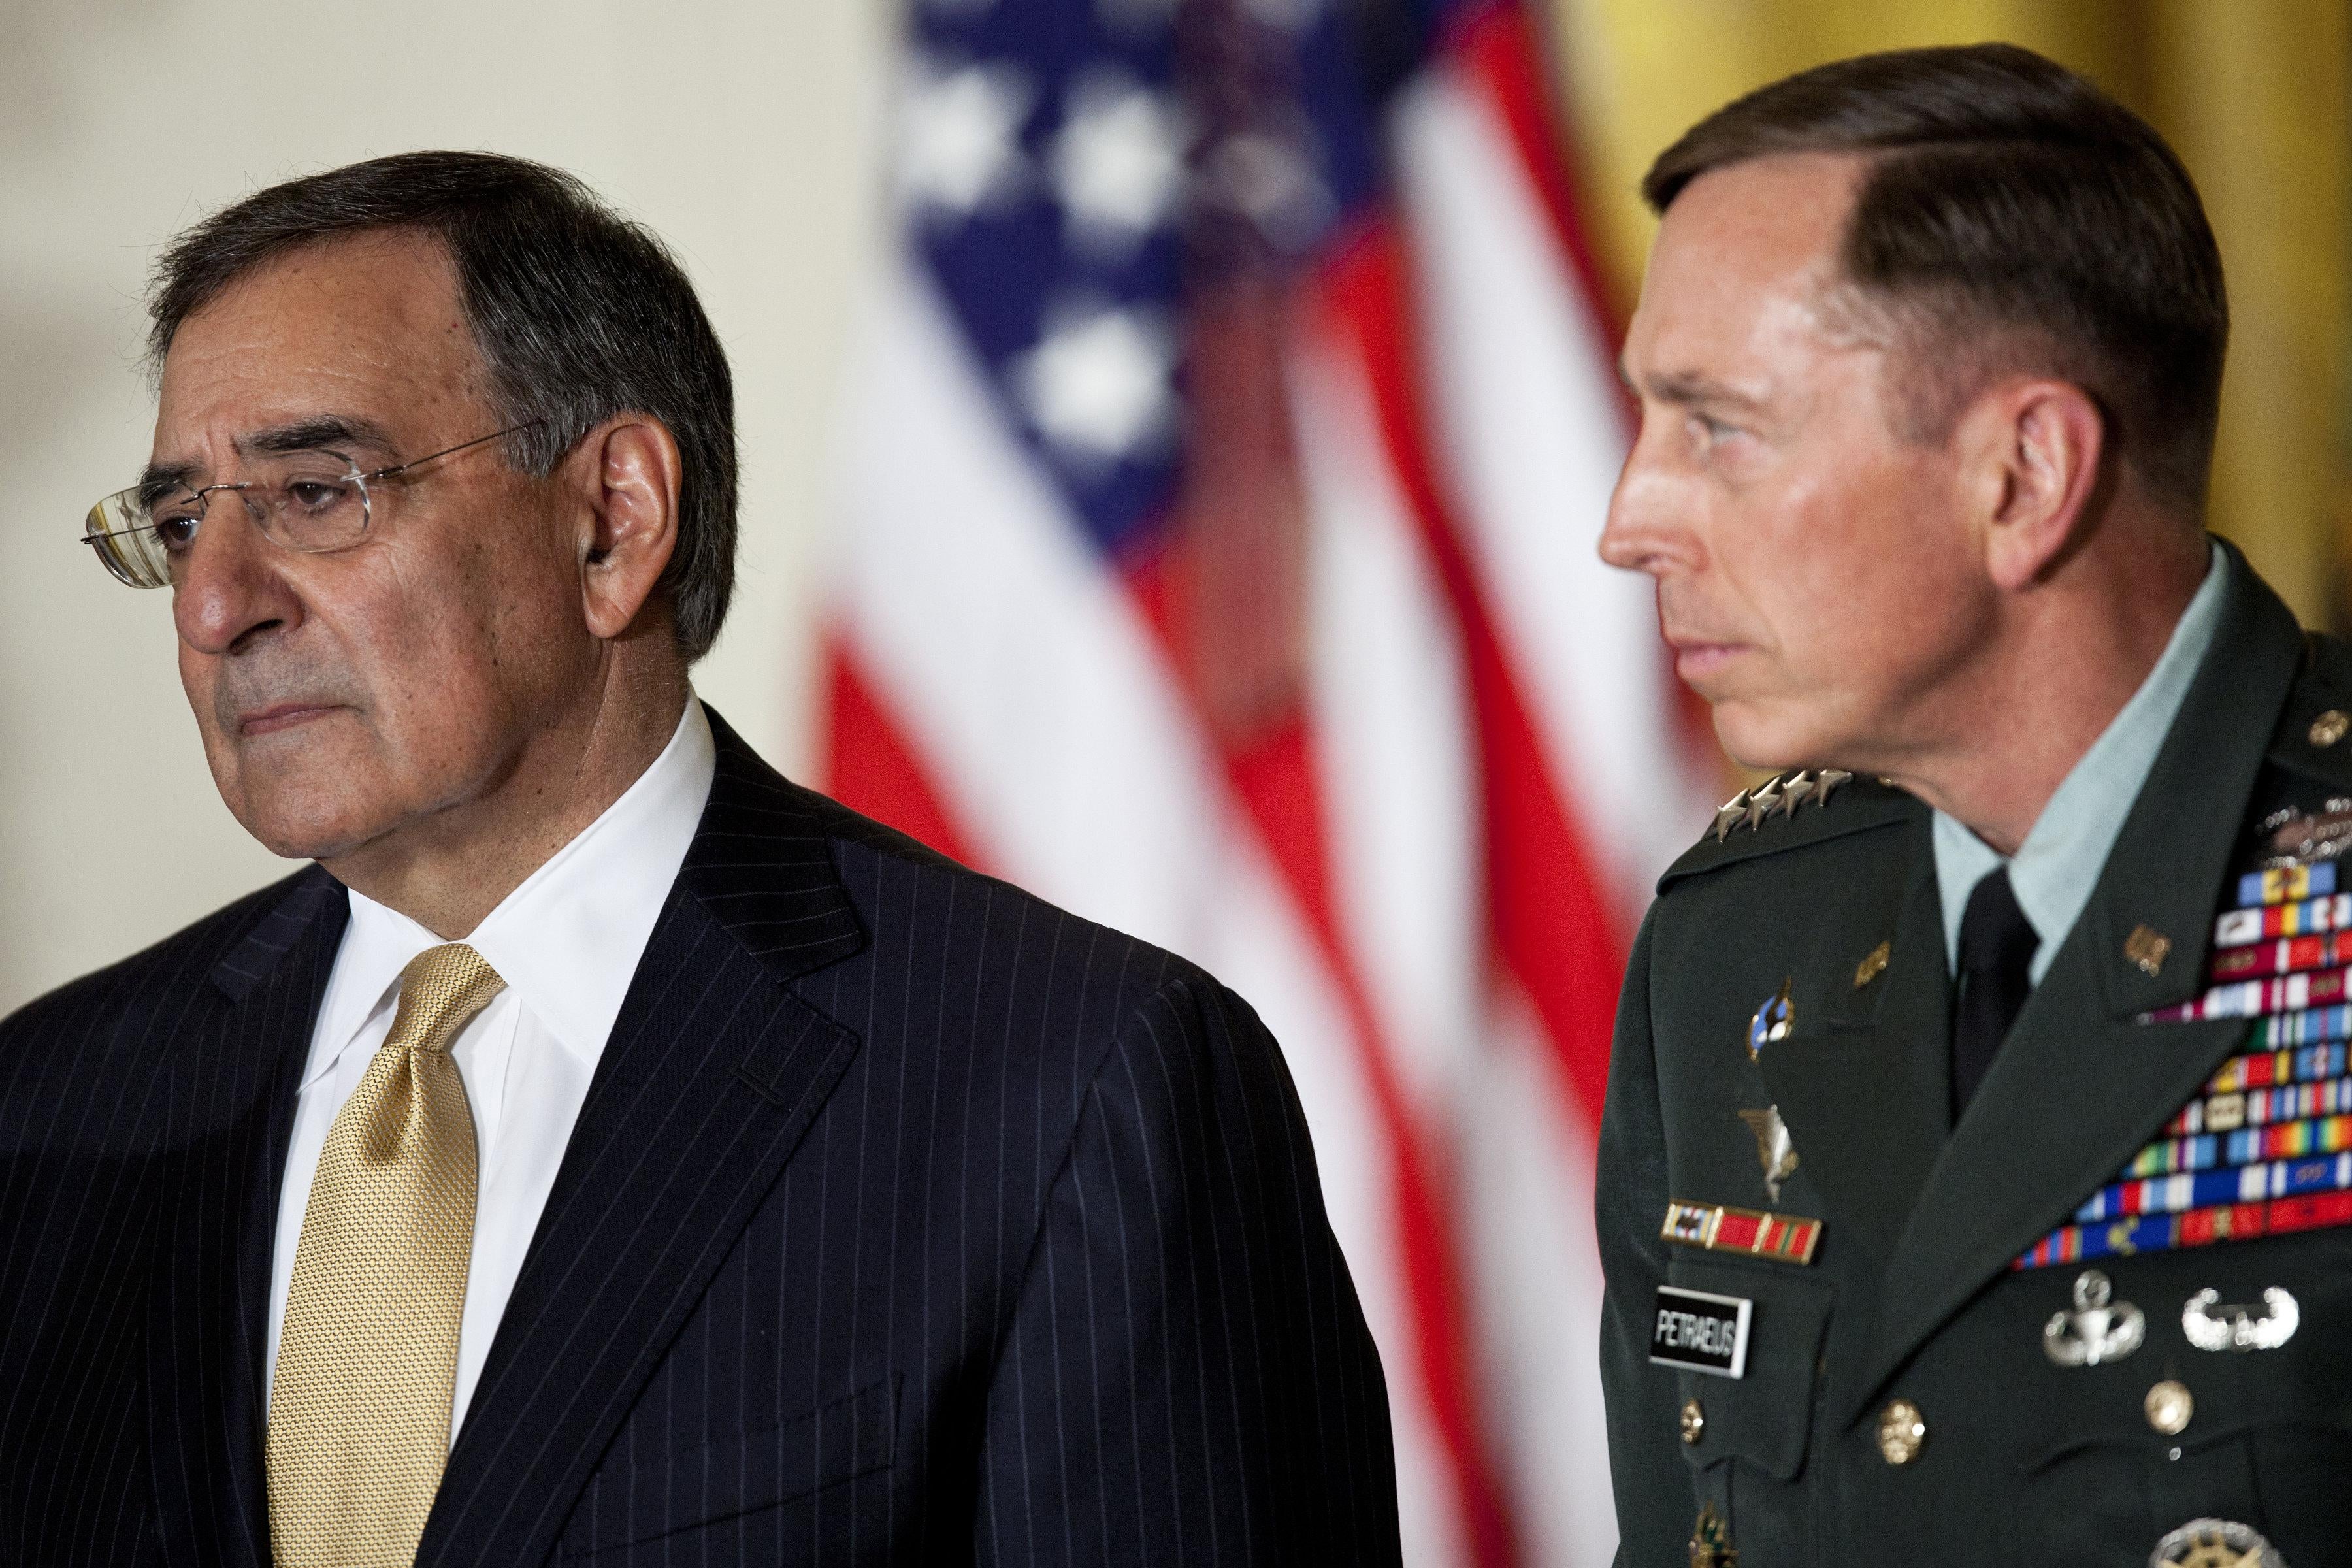 Then director of the Central Intelligence Agency Leon Panetta and Gen. David Petraeus listen during an event in the East Room of the White House.